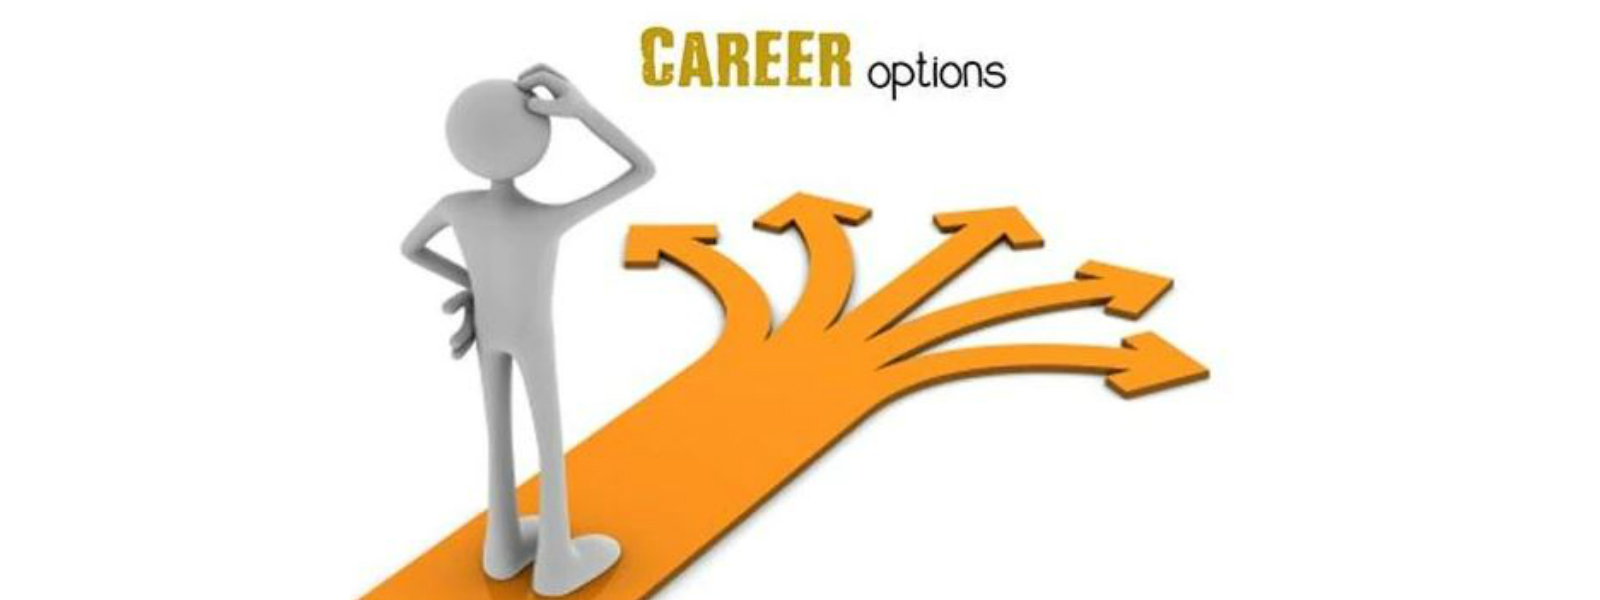 Choosing your career: Journey of a Thousand Miles